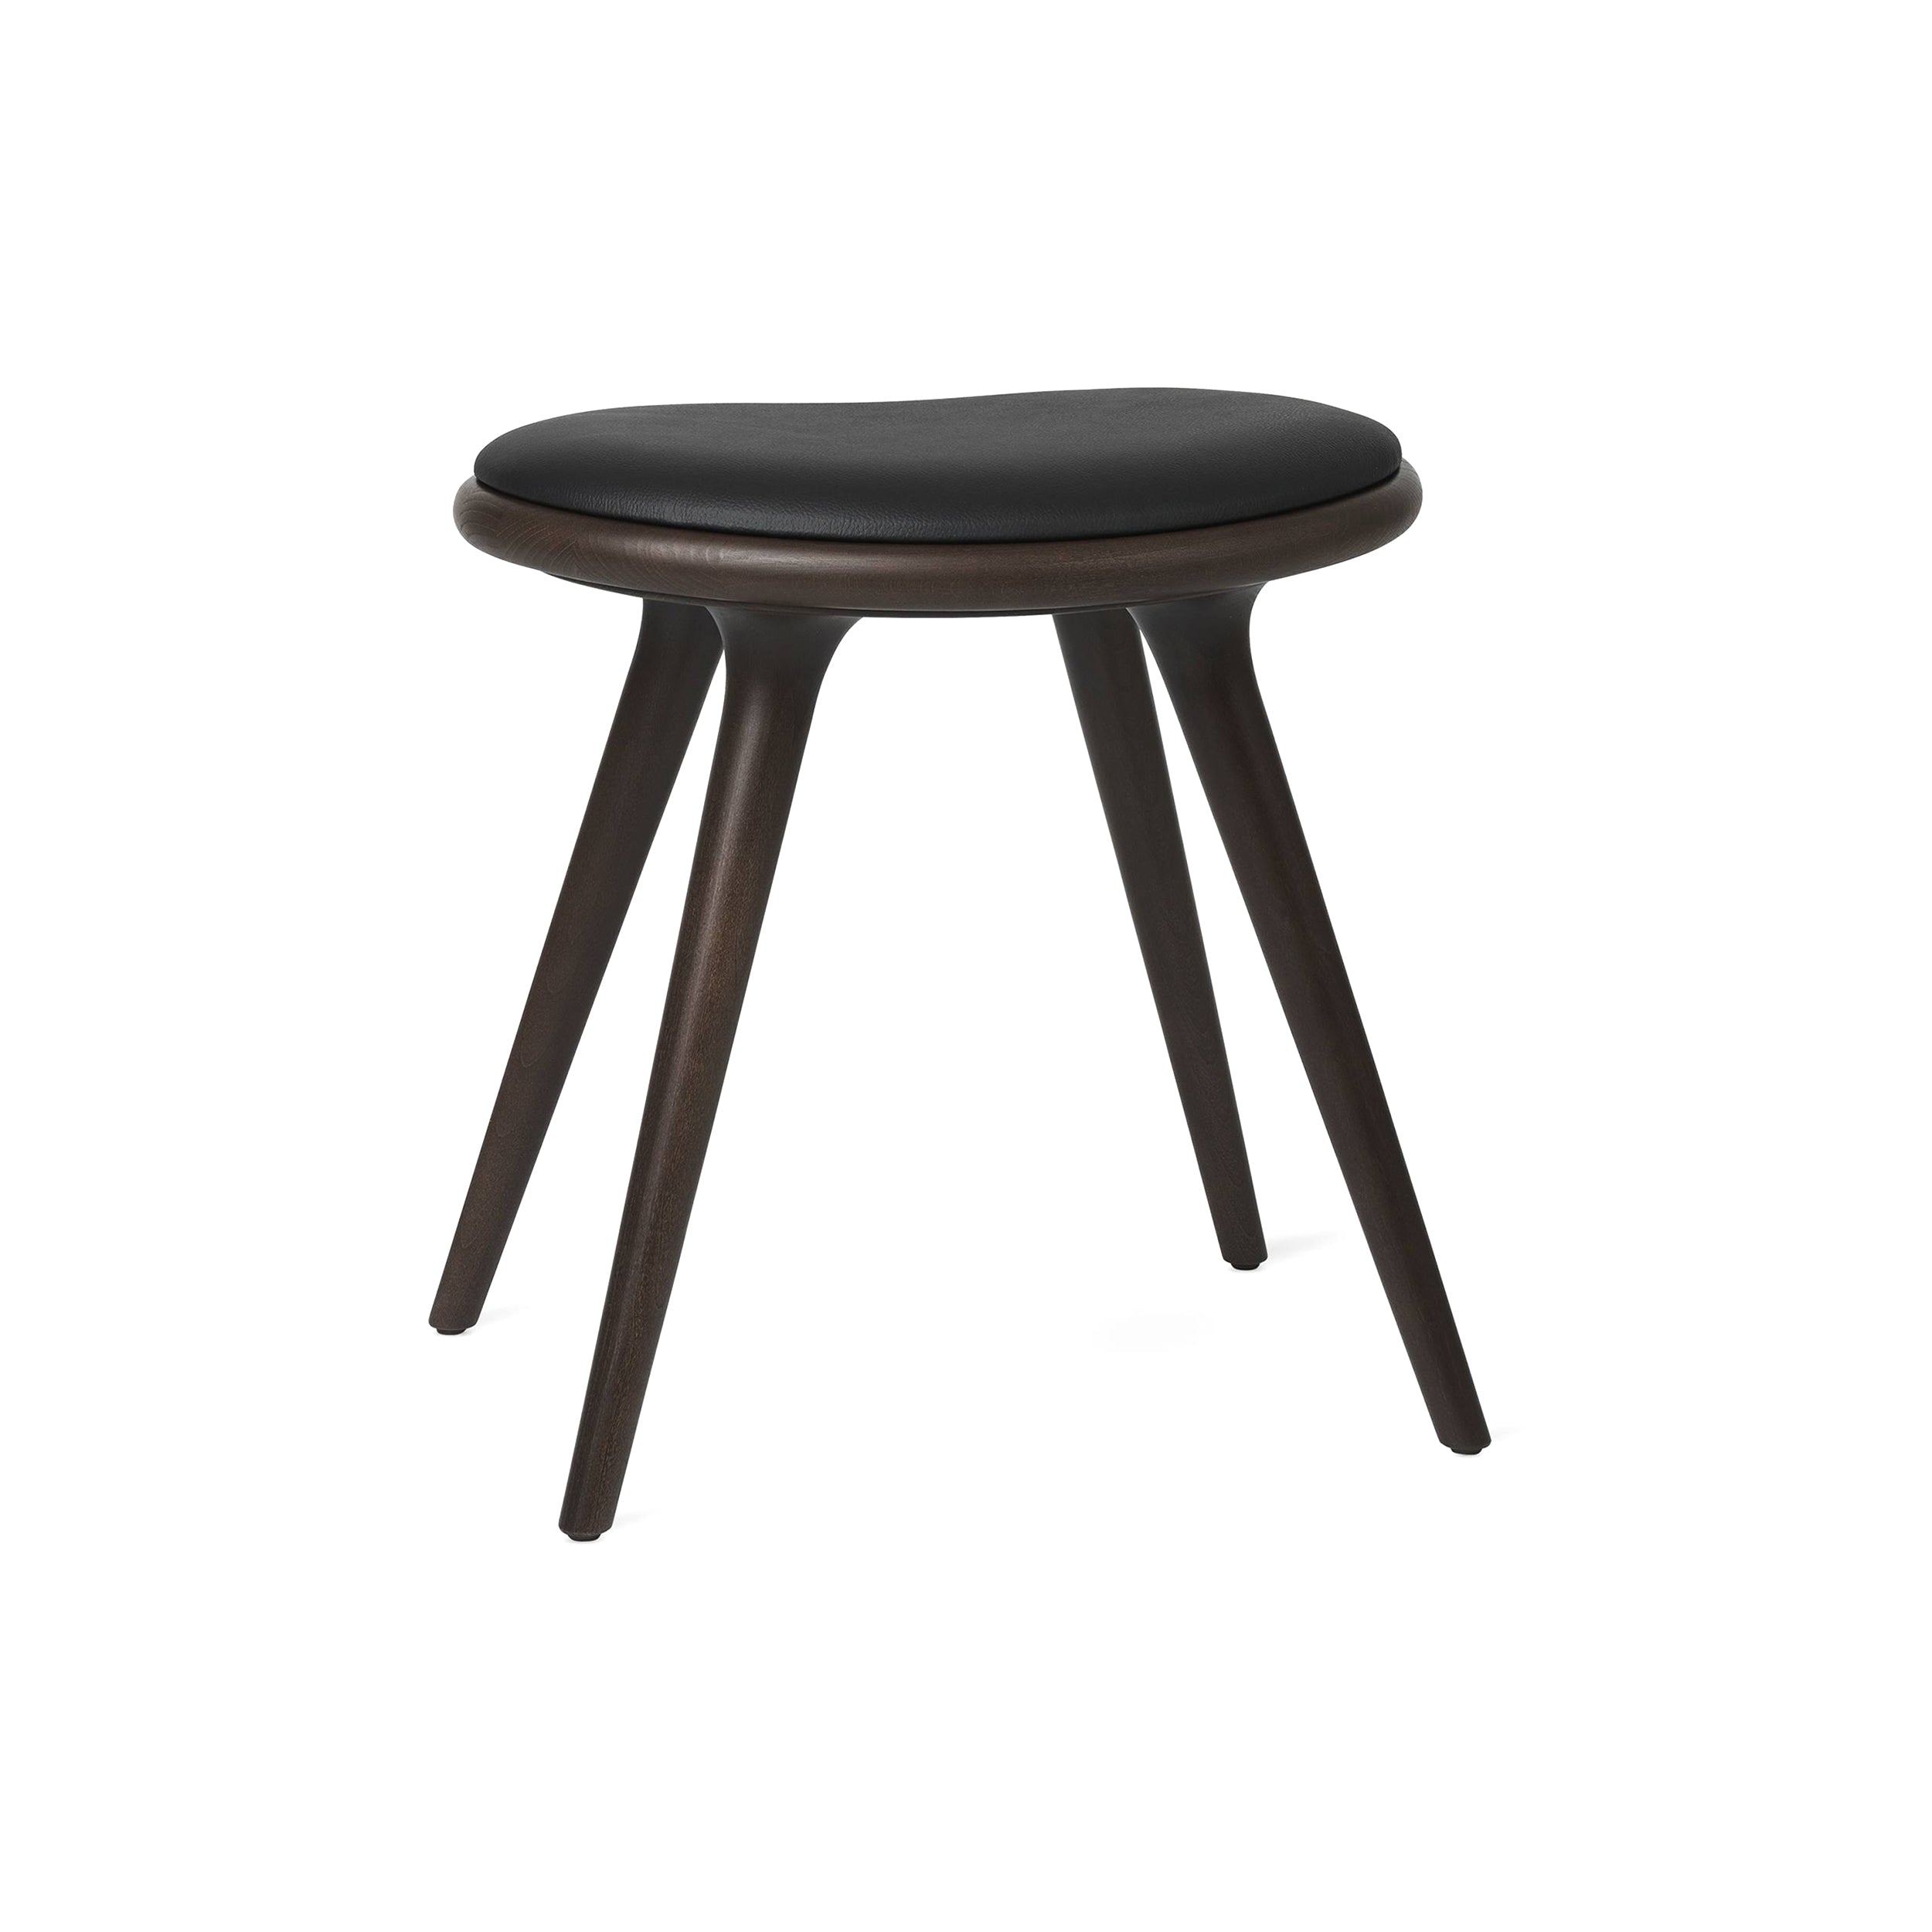 Low Stool: Dark Stained Beech + Black Leather